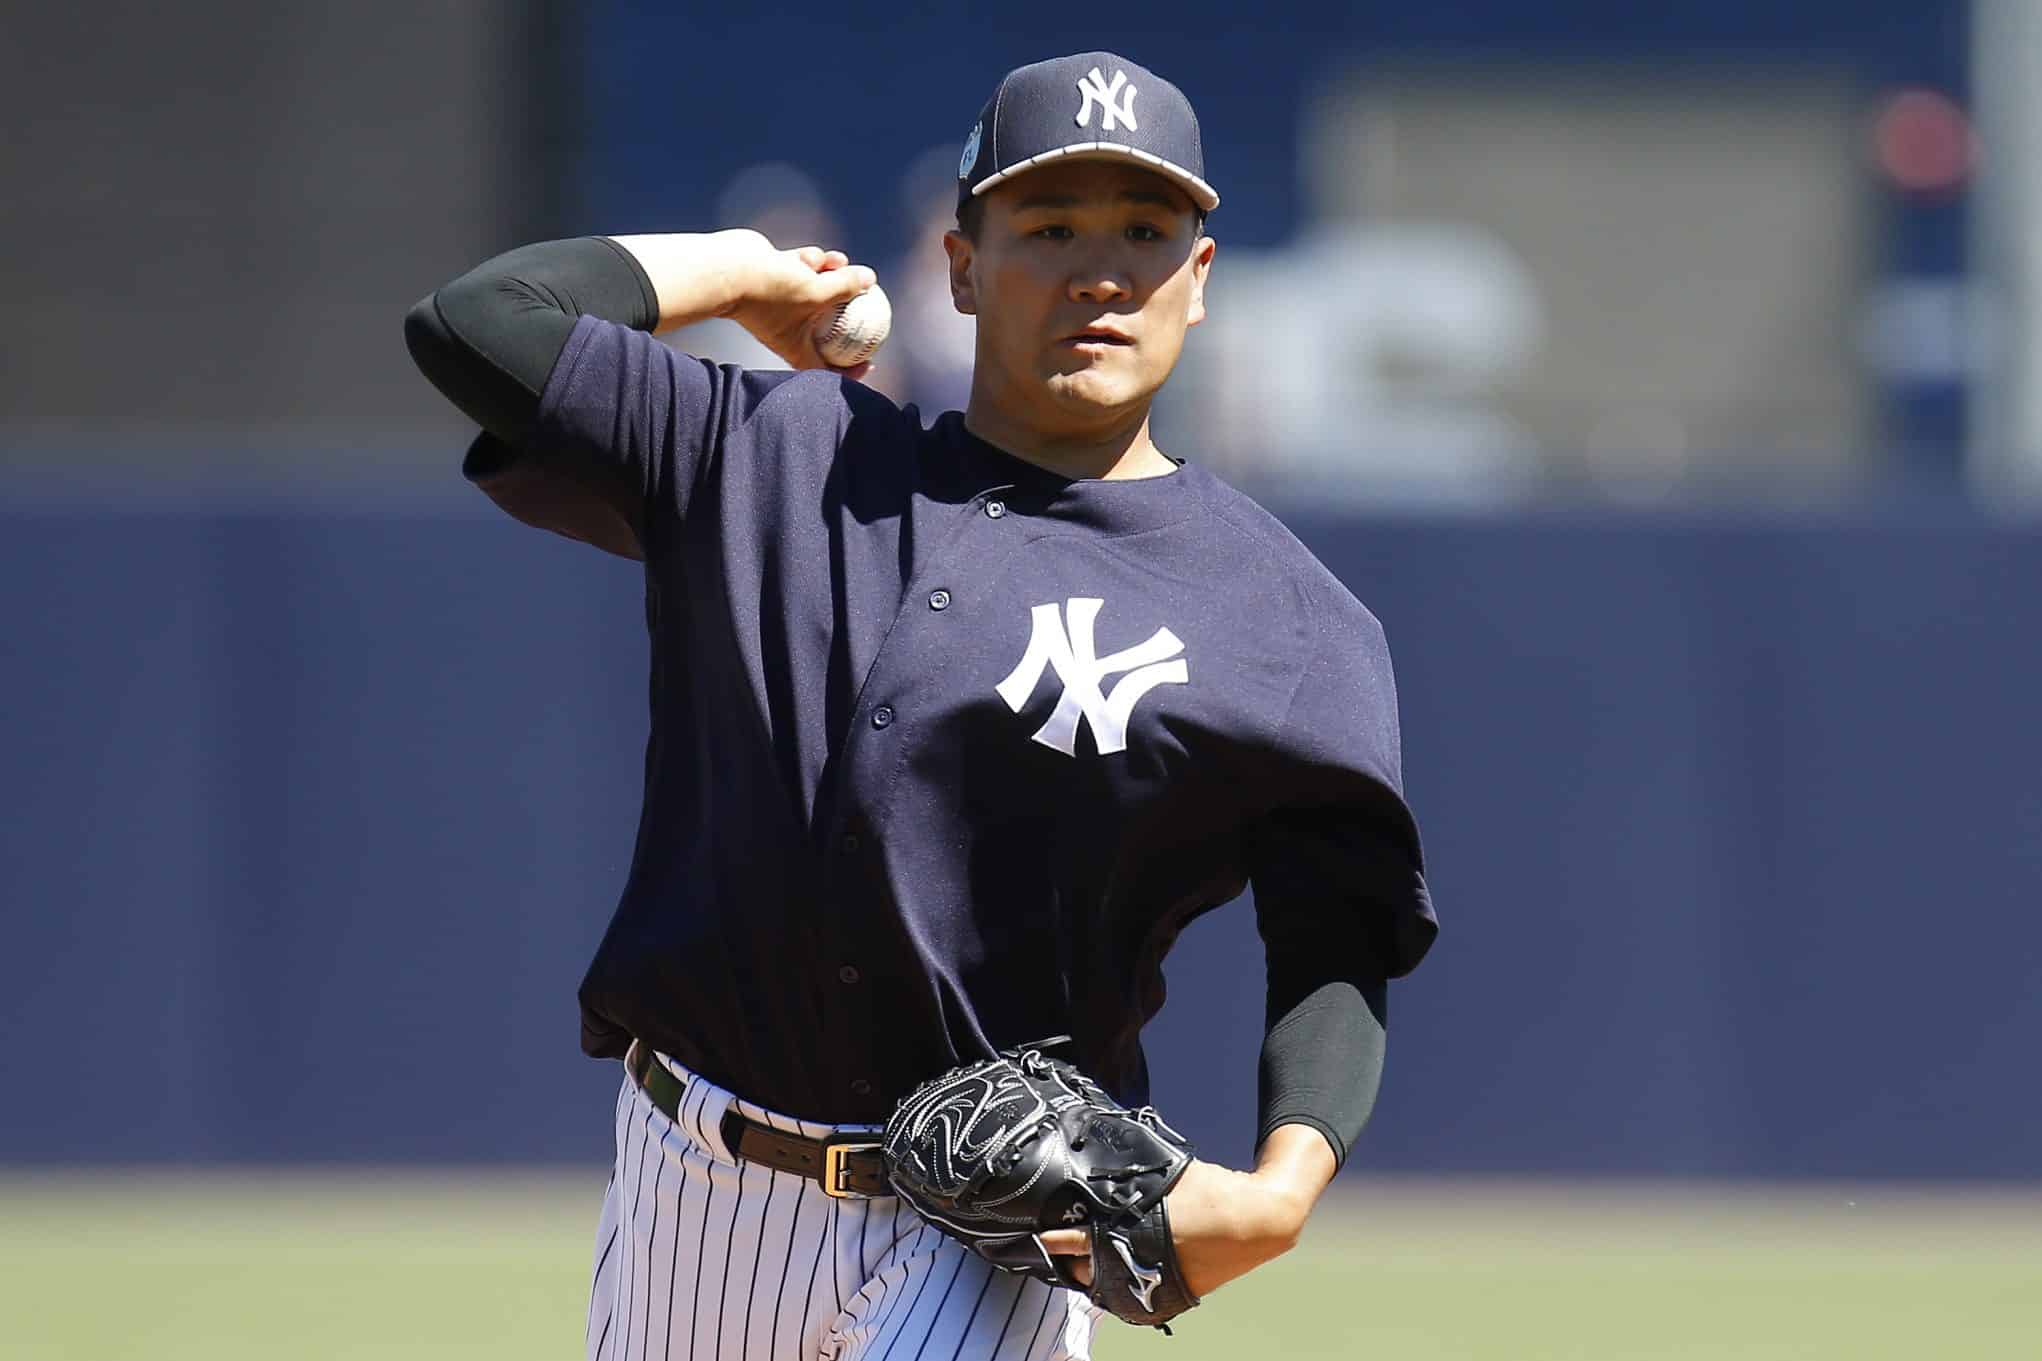 New York Yankees announce when pitchers and catchers are to report